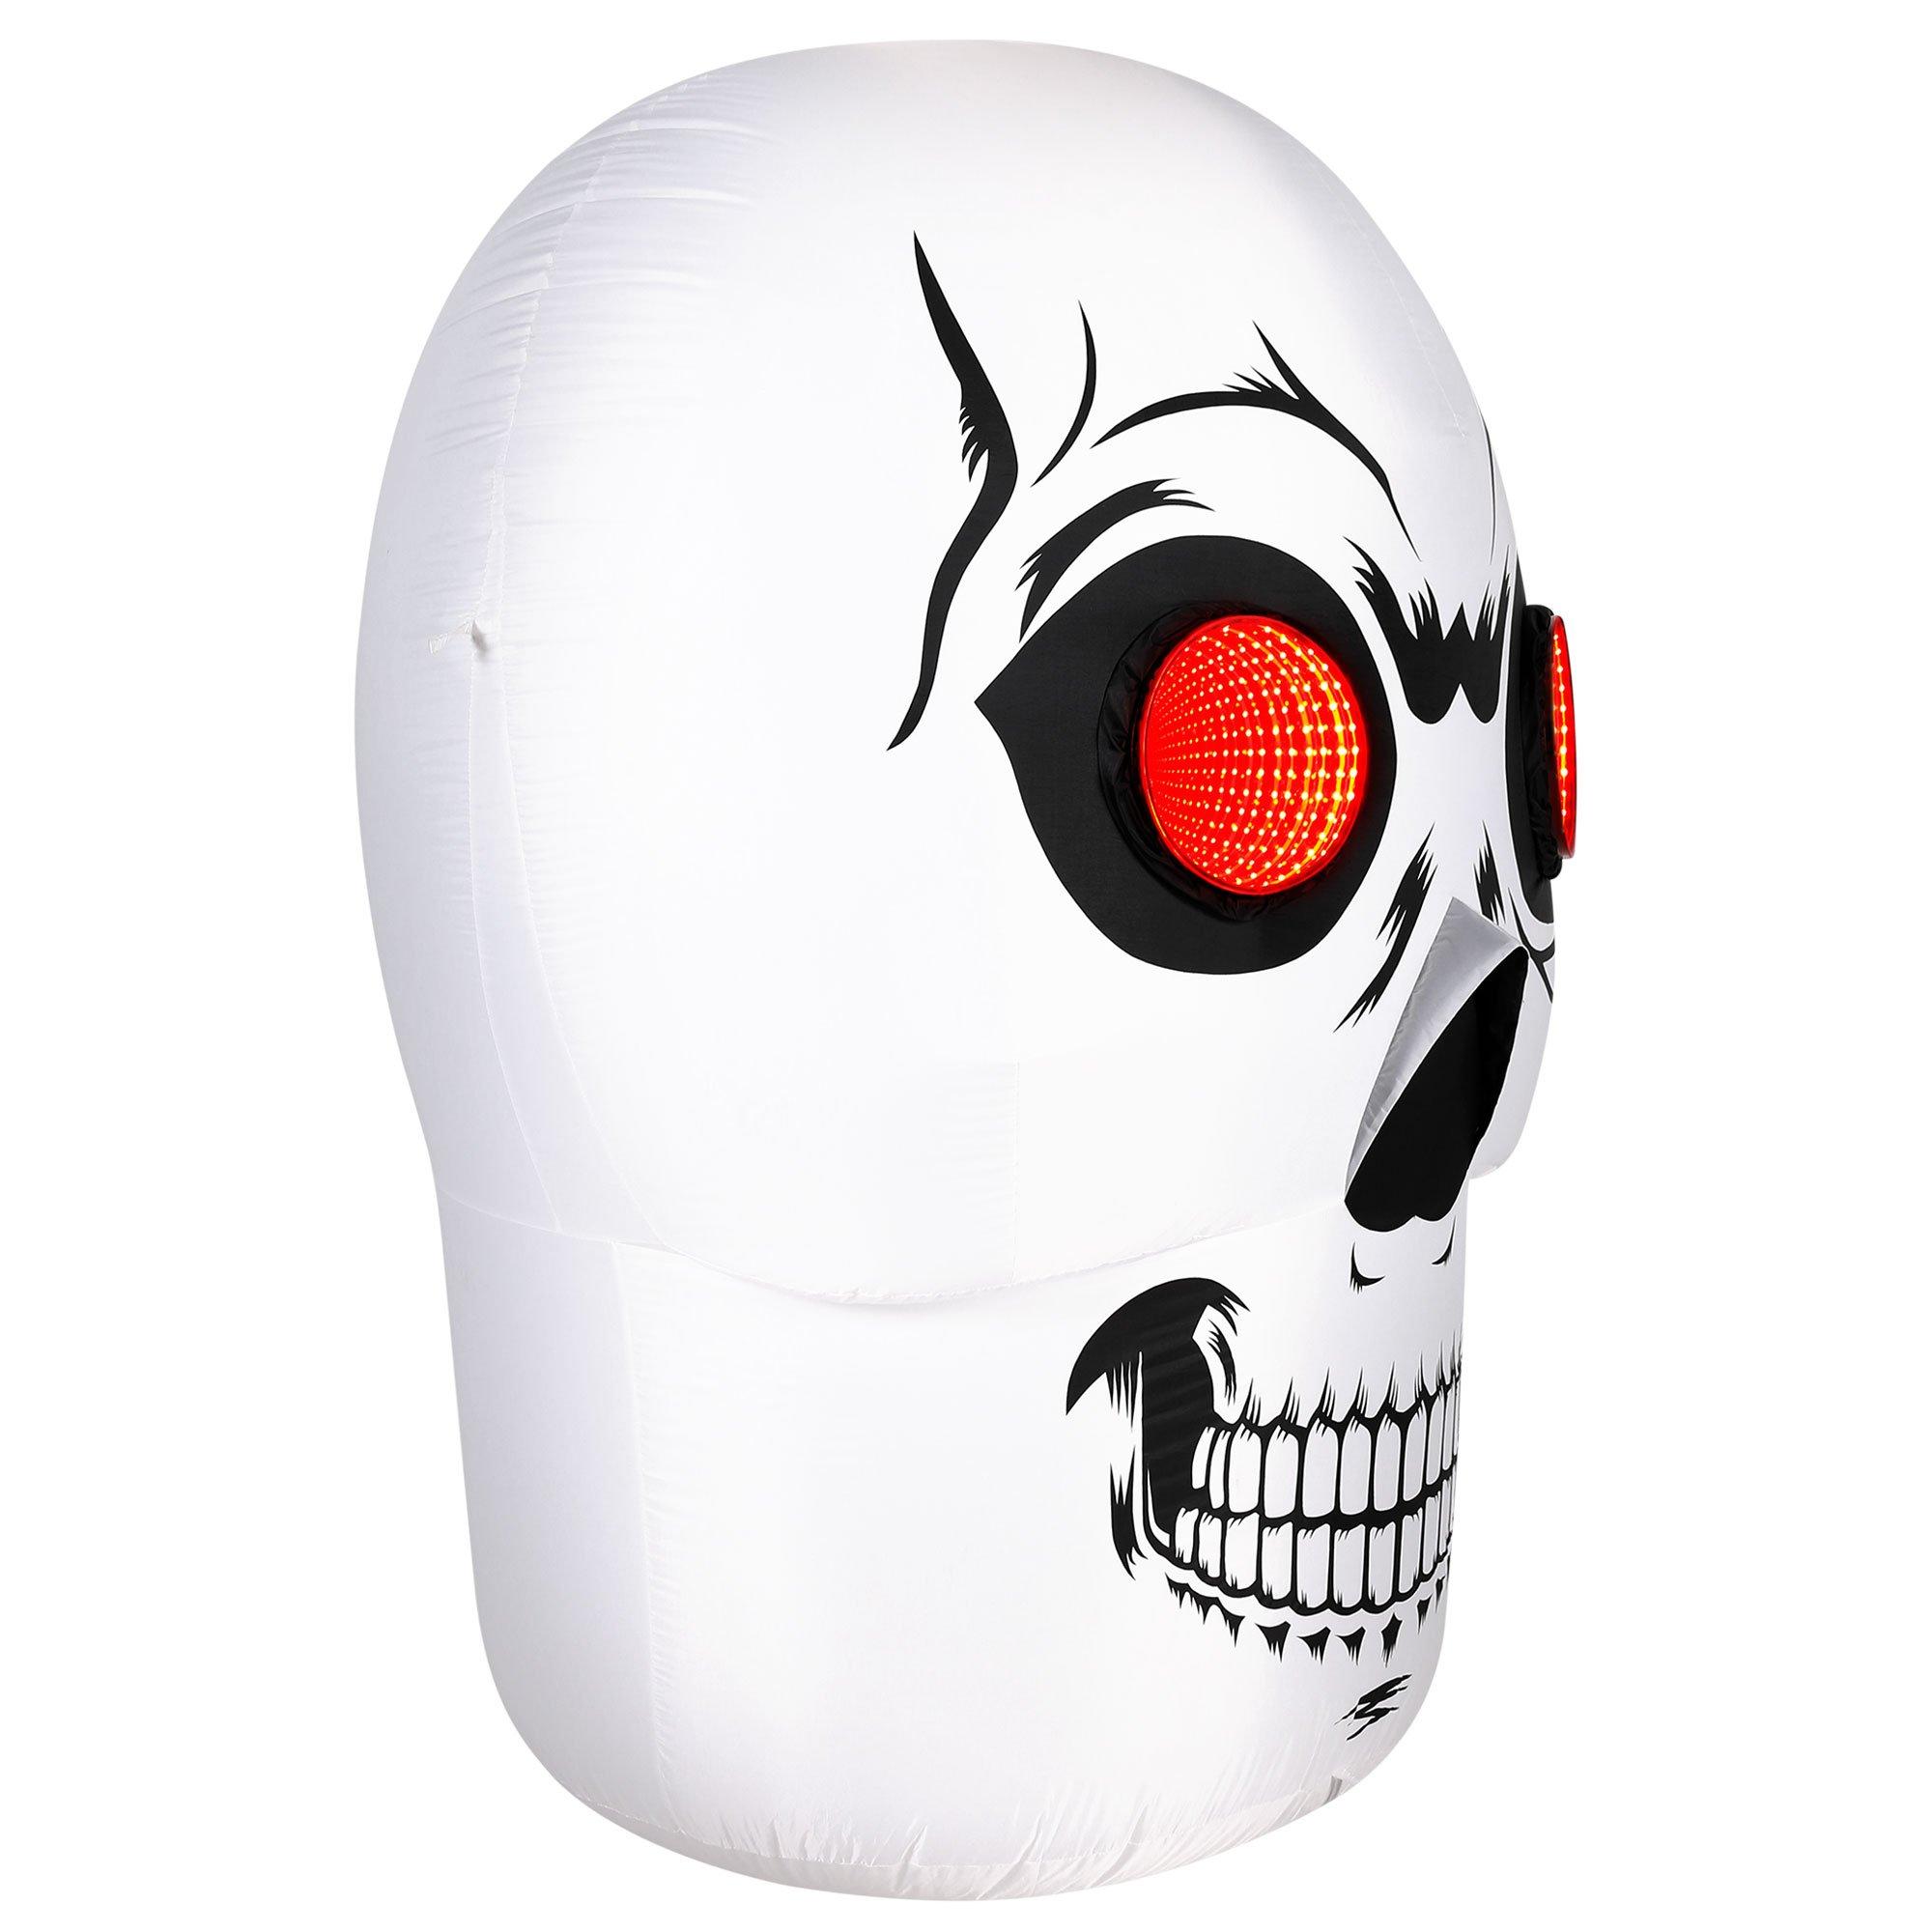 Light-Up Infinity Mirror Skull Inflatable Yard Decoration, 3.3ft x 5ft